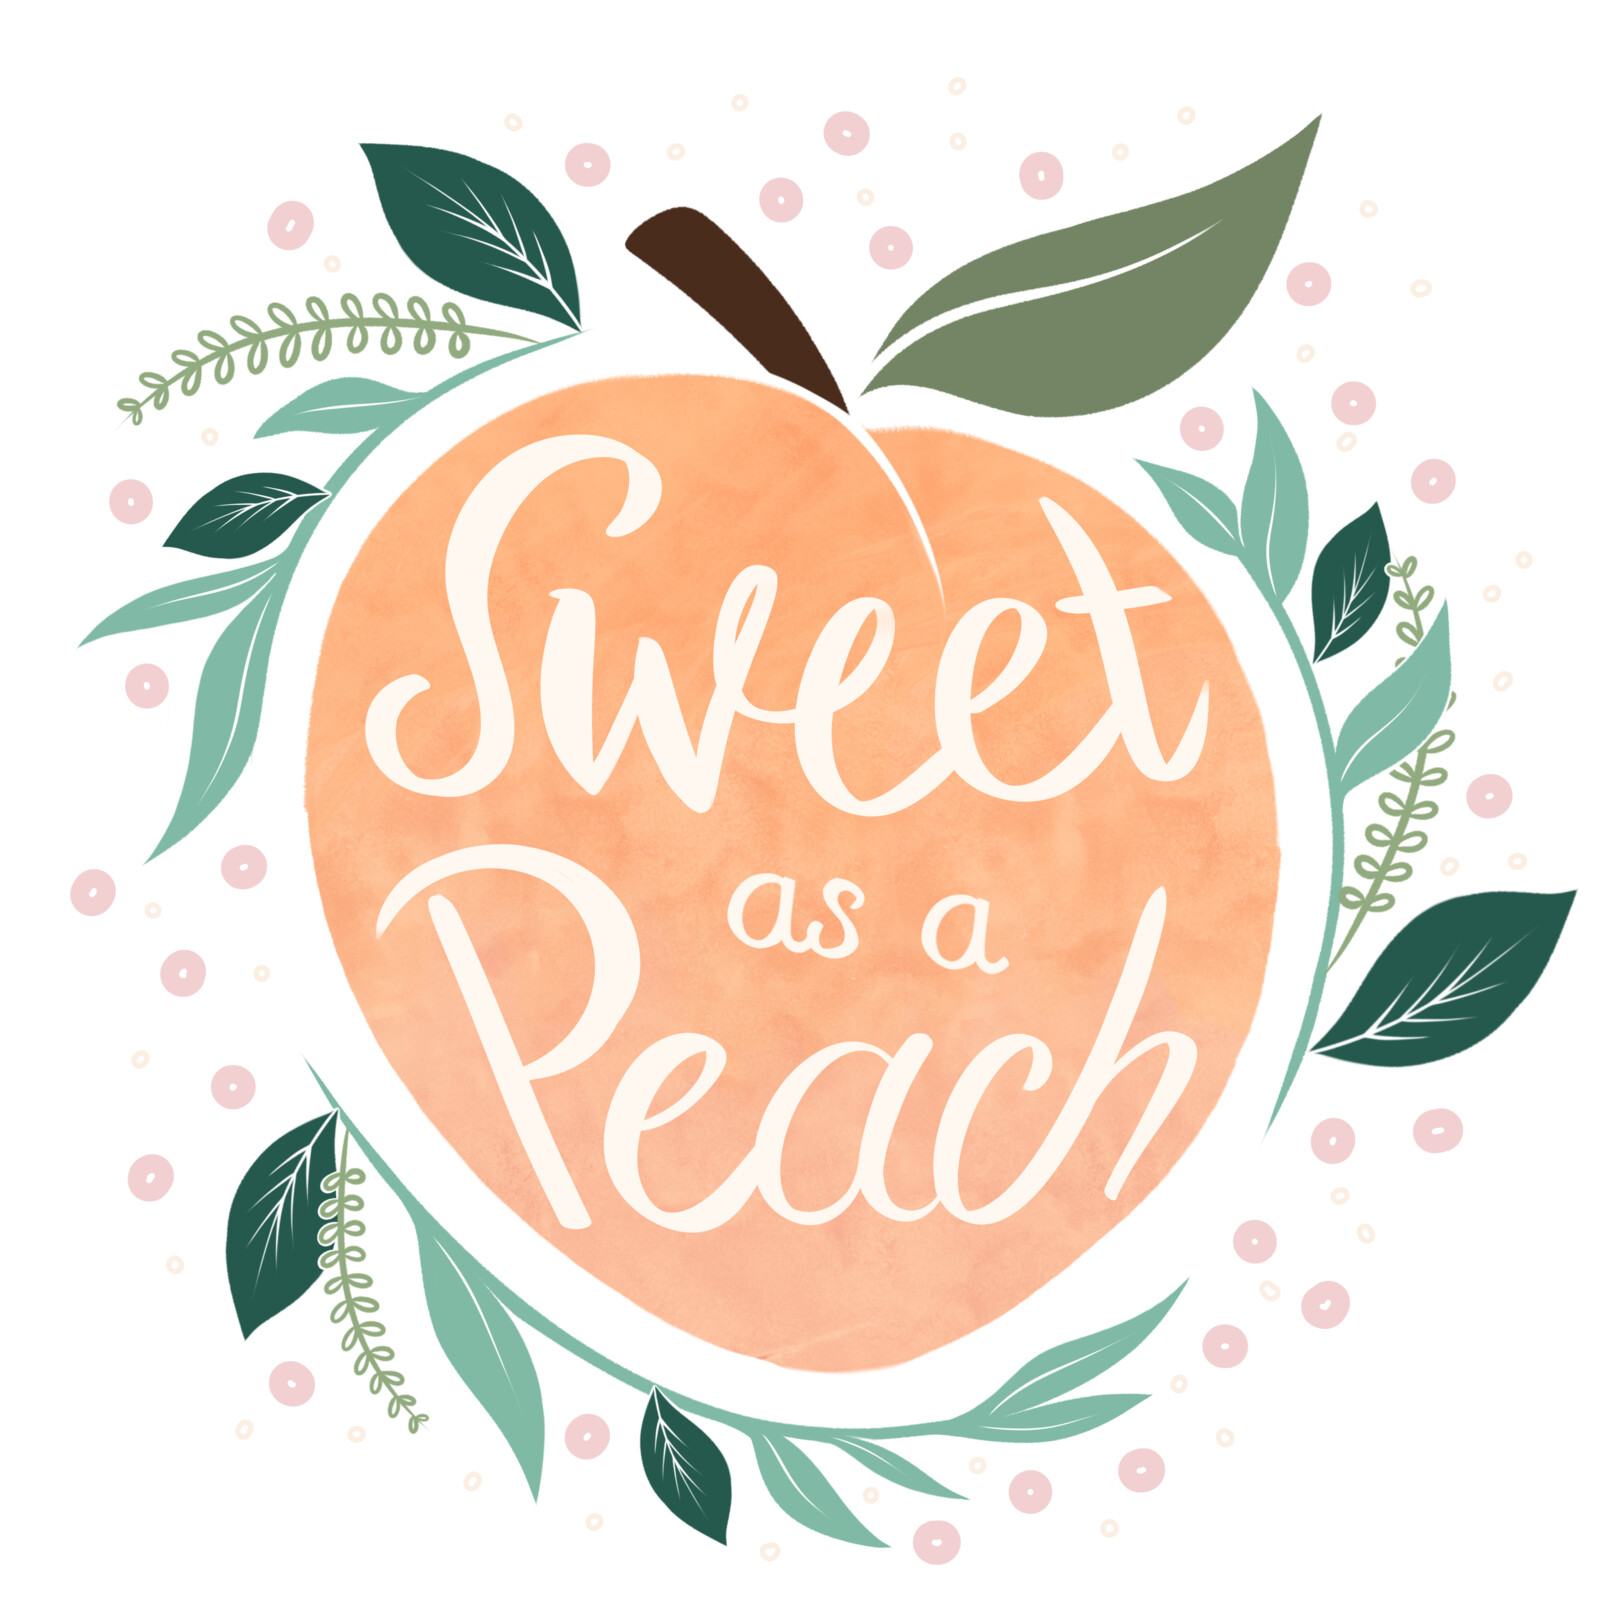 Sweet as a Peach: Poster/Sign Design